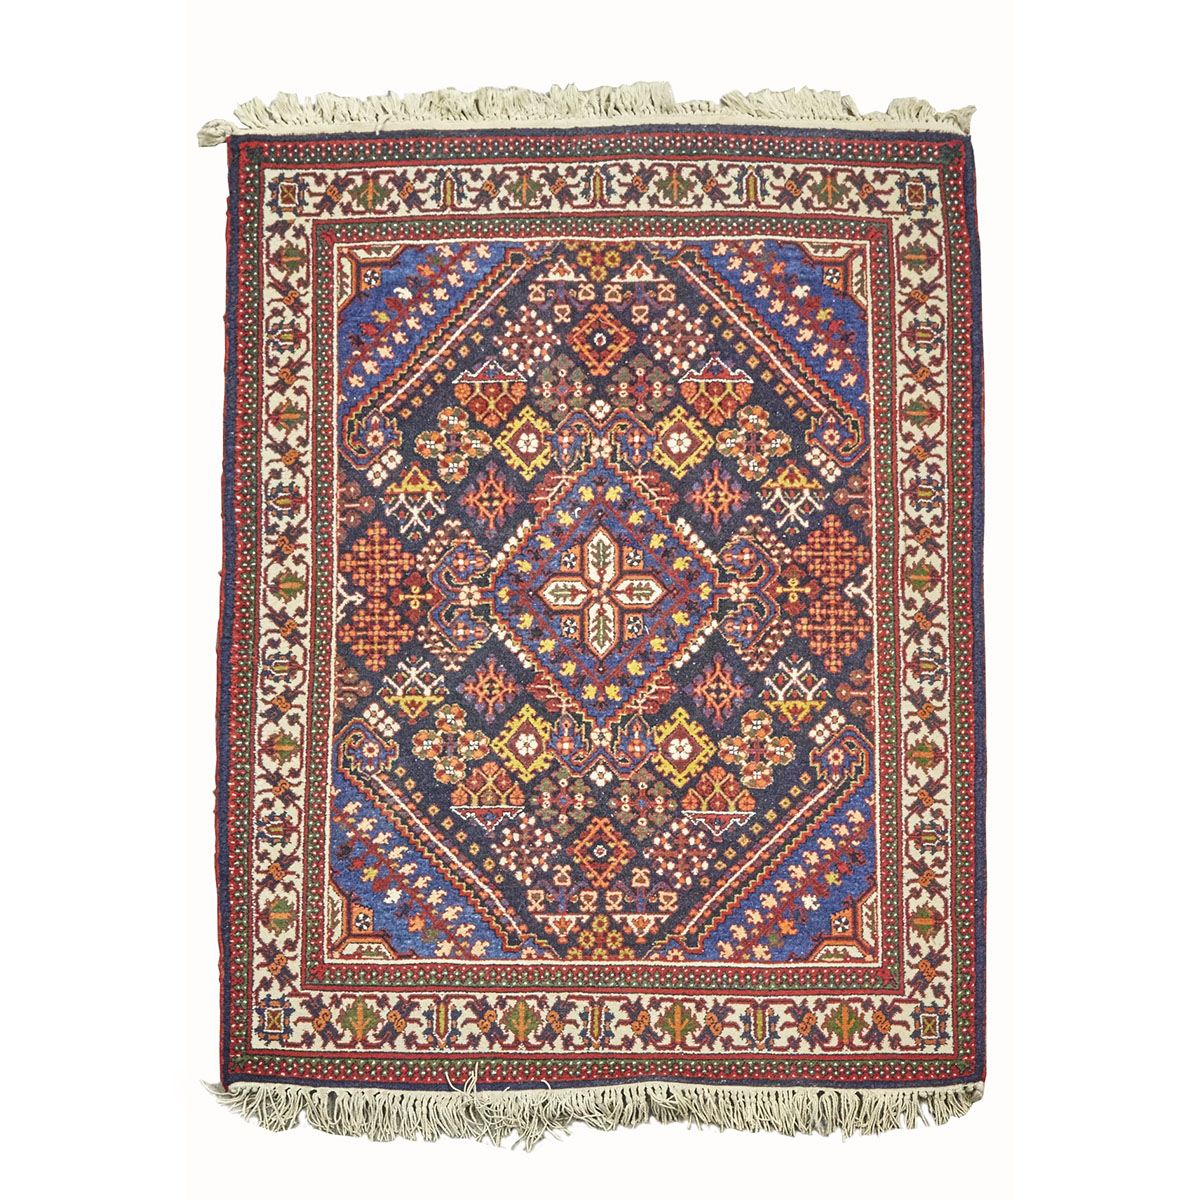 South Persian Rug, late 20th century